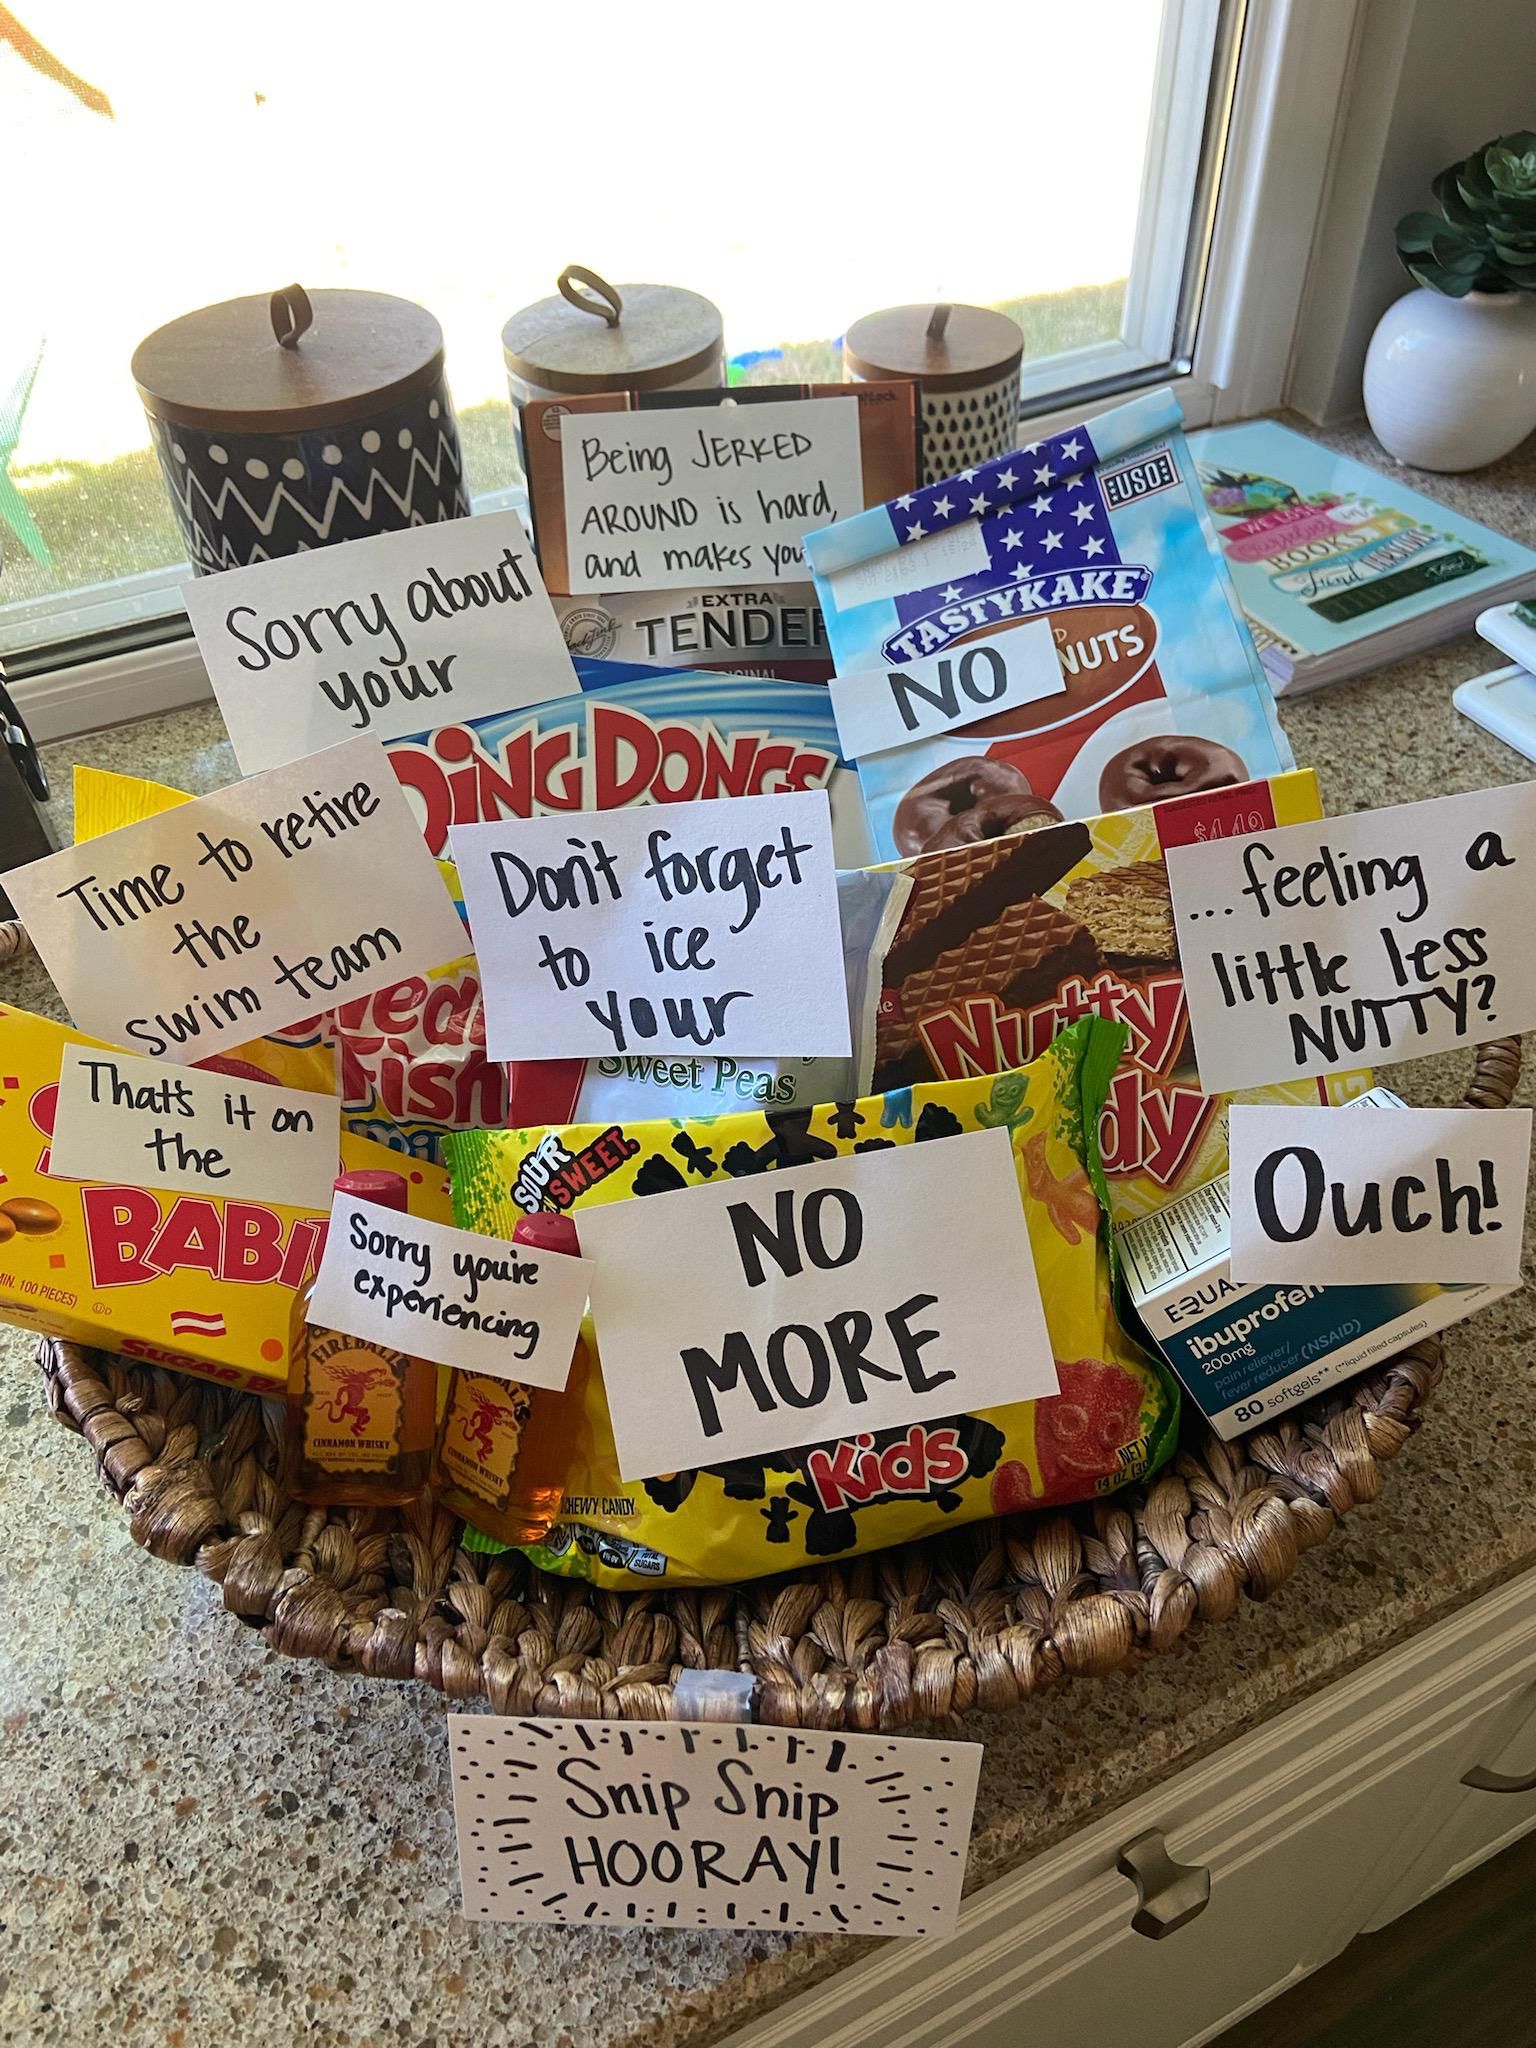 The get well basket my wife made me for my vasectomy today